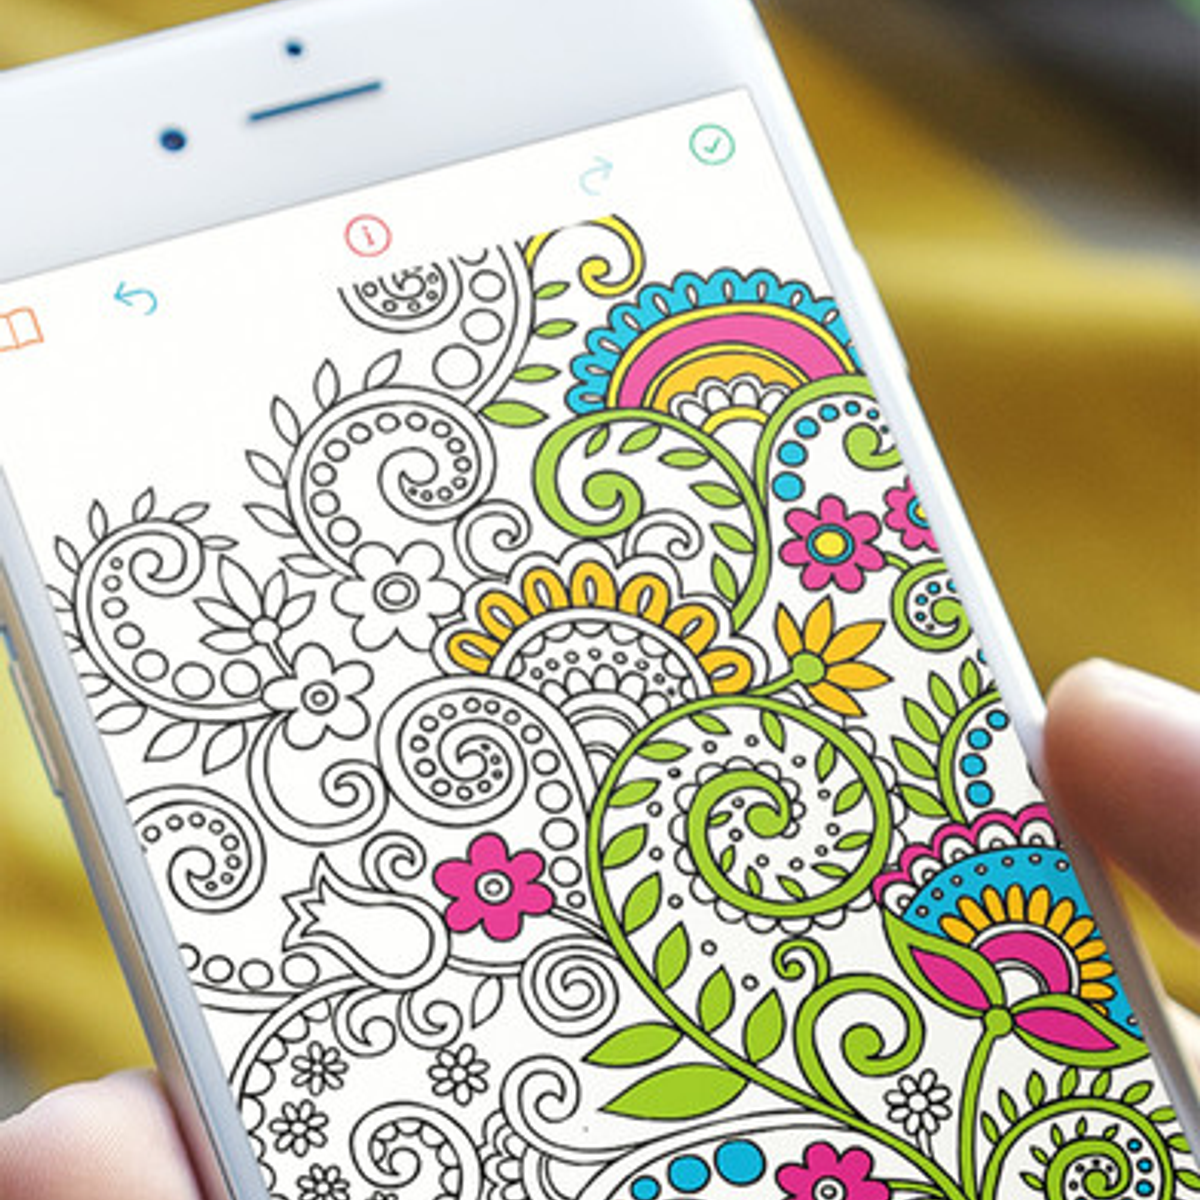 Download Recolor - Coloring Book For Adults Alternatives and Similar Apps - AlternativeTo.net